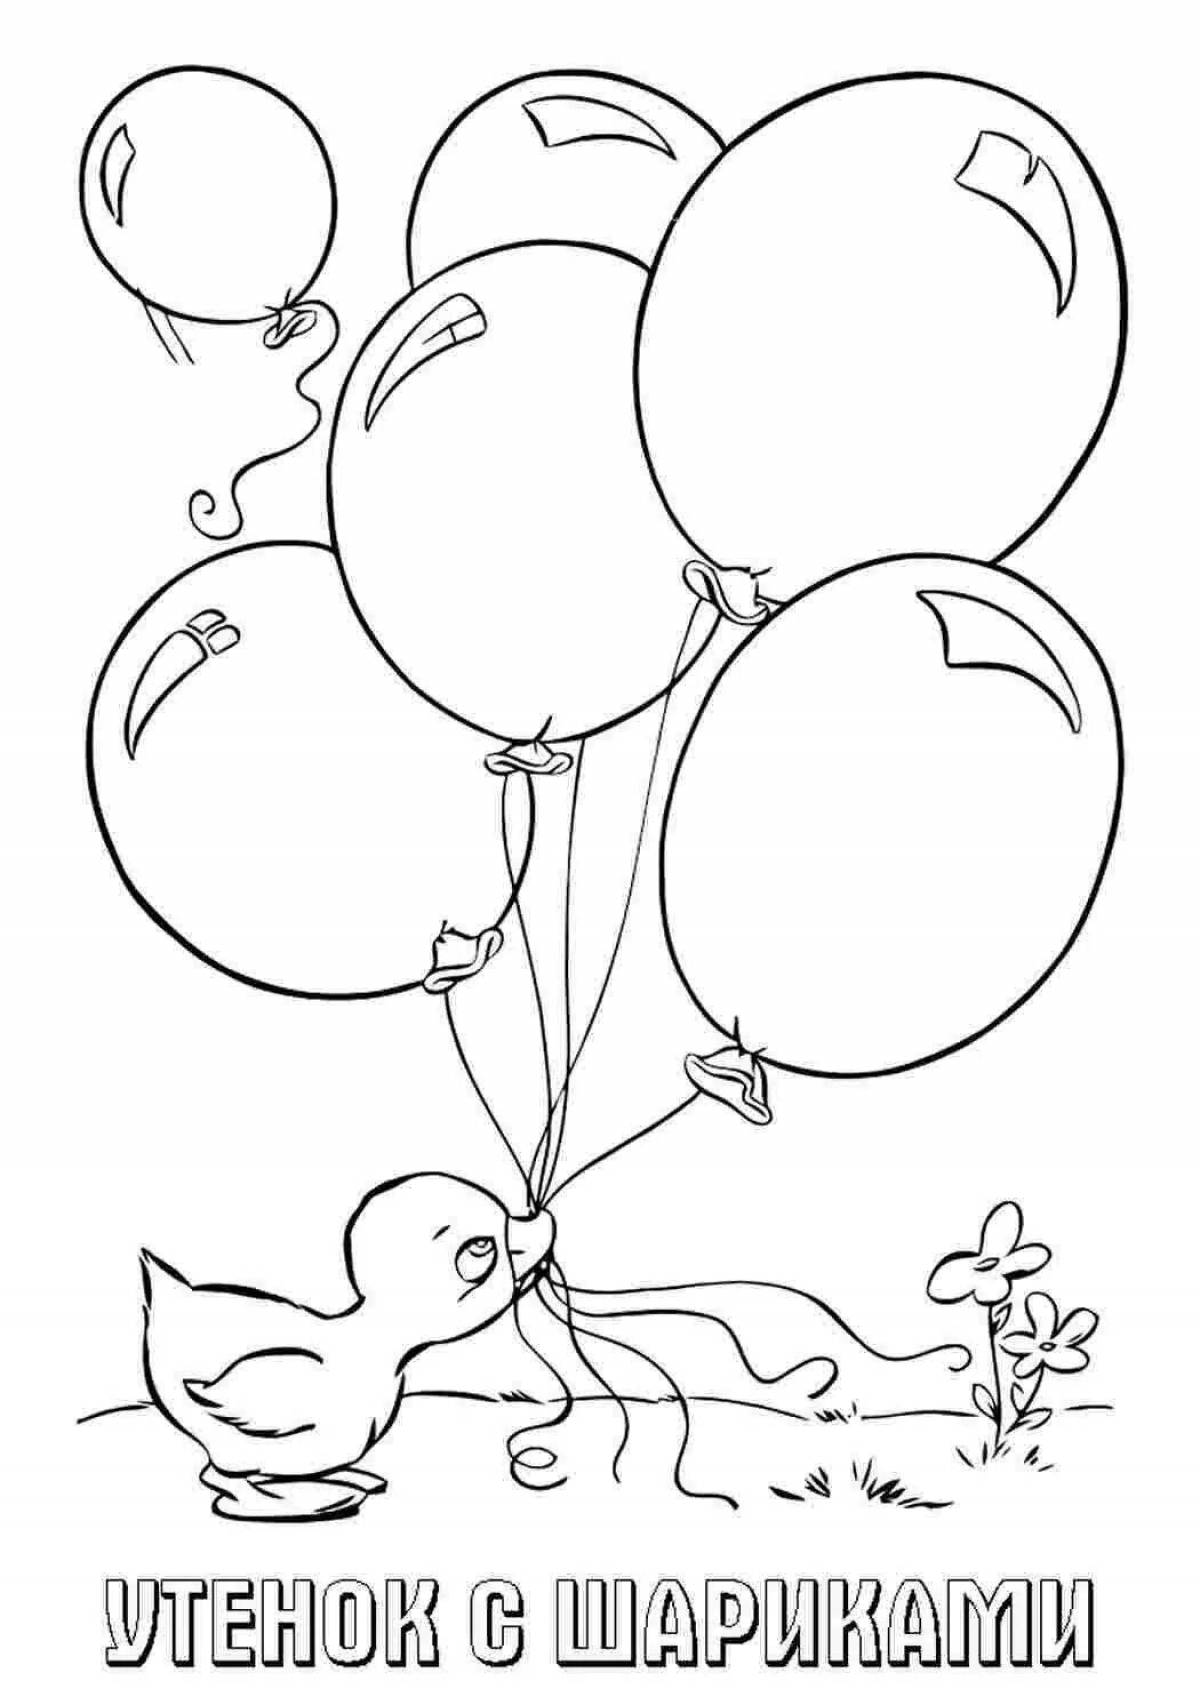 Floating balloons for children 2-3 years old